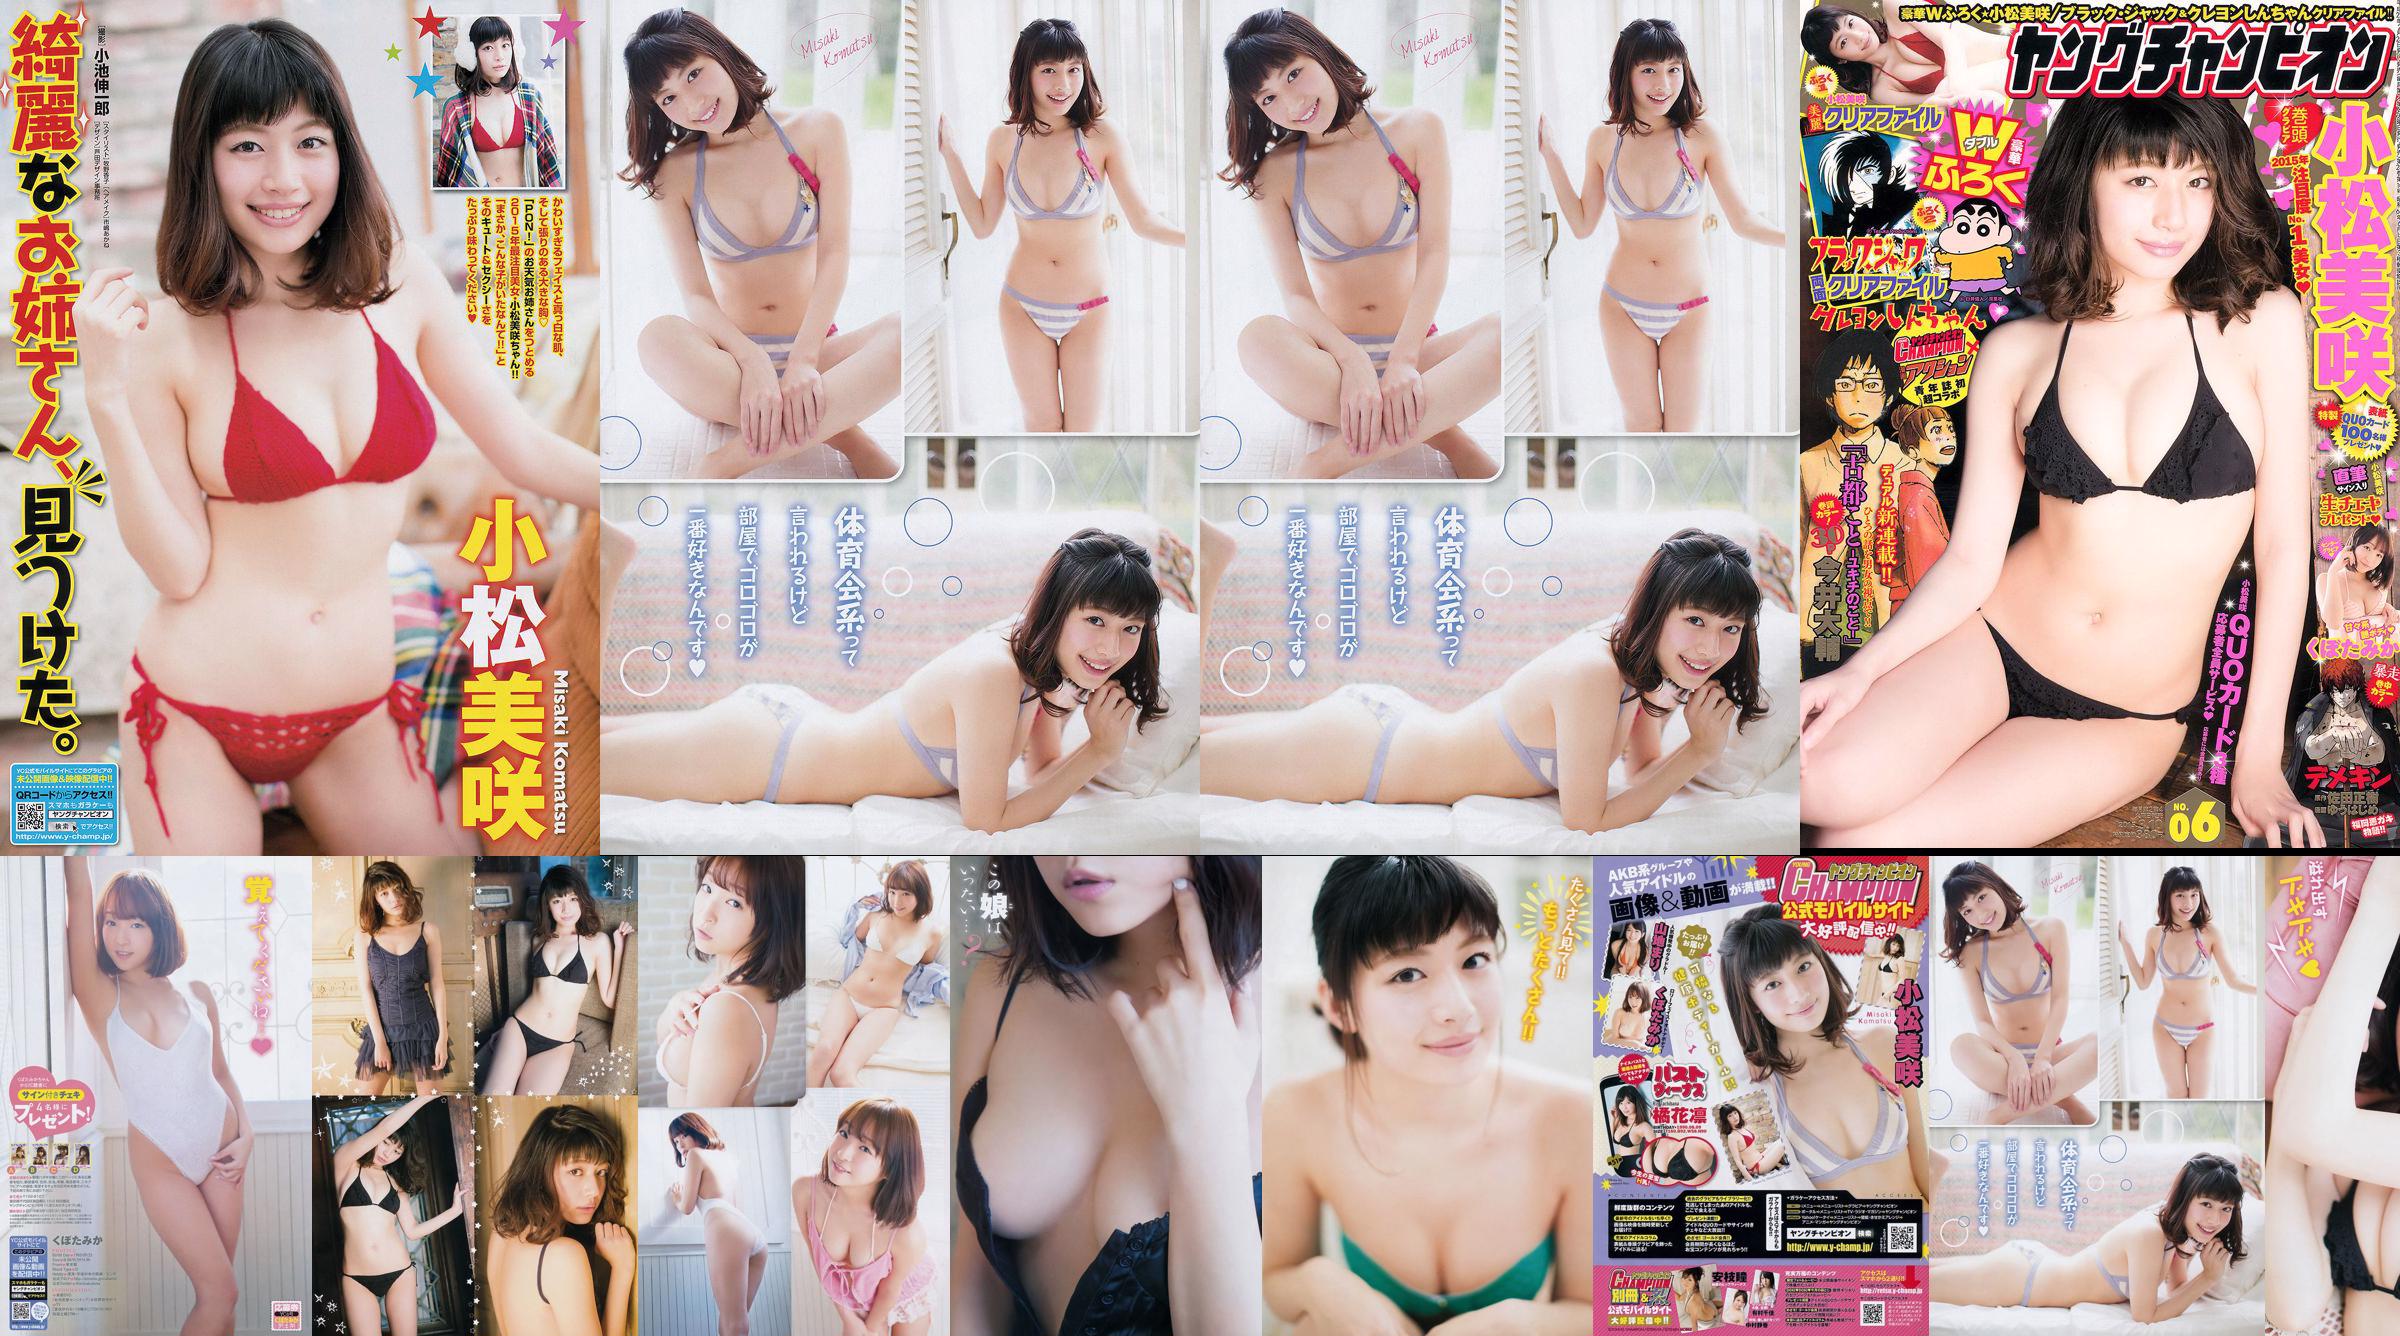 Hina Aizuki "Chaque! Belle! Fille !!" [Sabra.net] Strictly Girl No.3dac0a Page 1